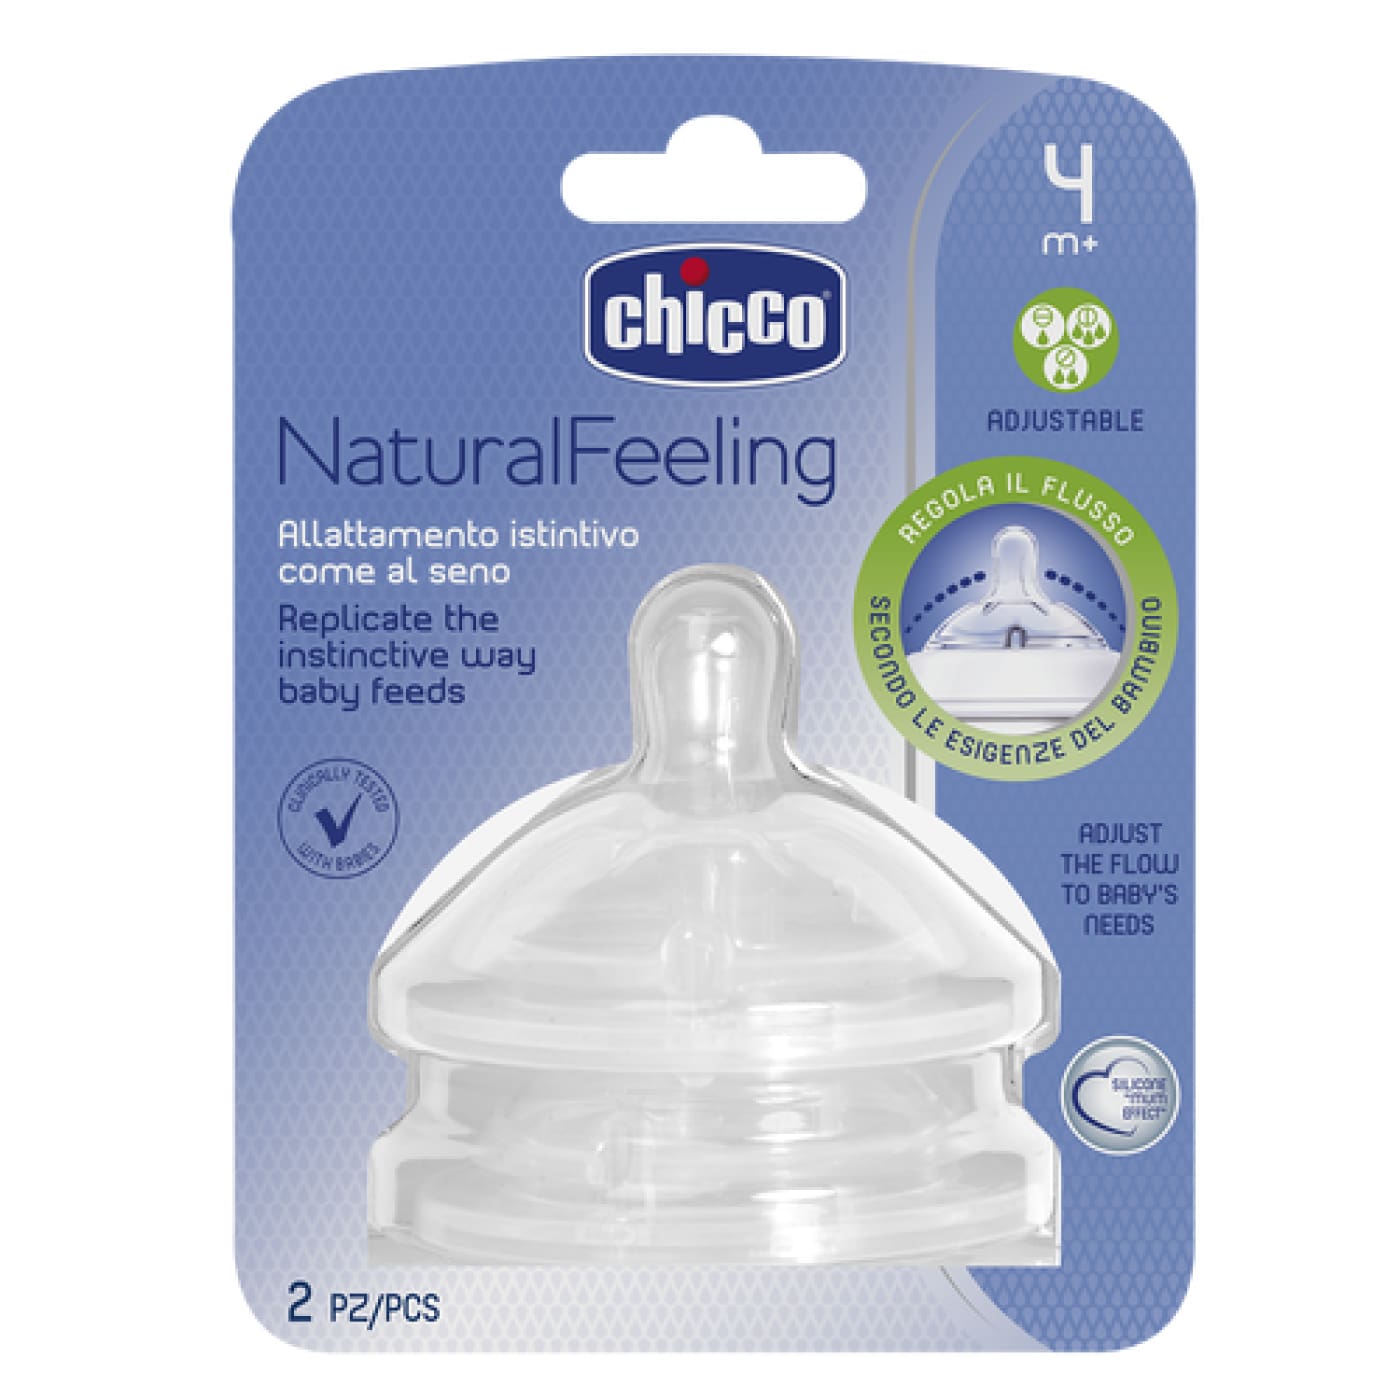 Chicco Natural Feeling Silicone Teat 4M+ 2pk - Adjustable Flow - NURSING & FEEDING - BOTTLE ACCESSORIES